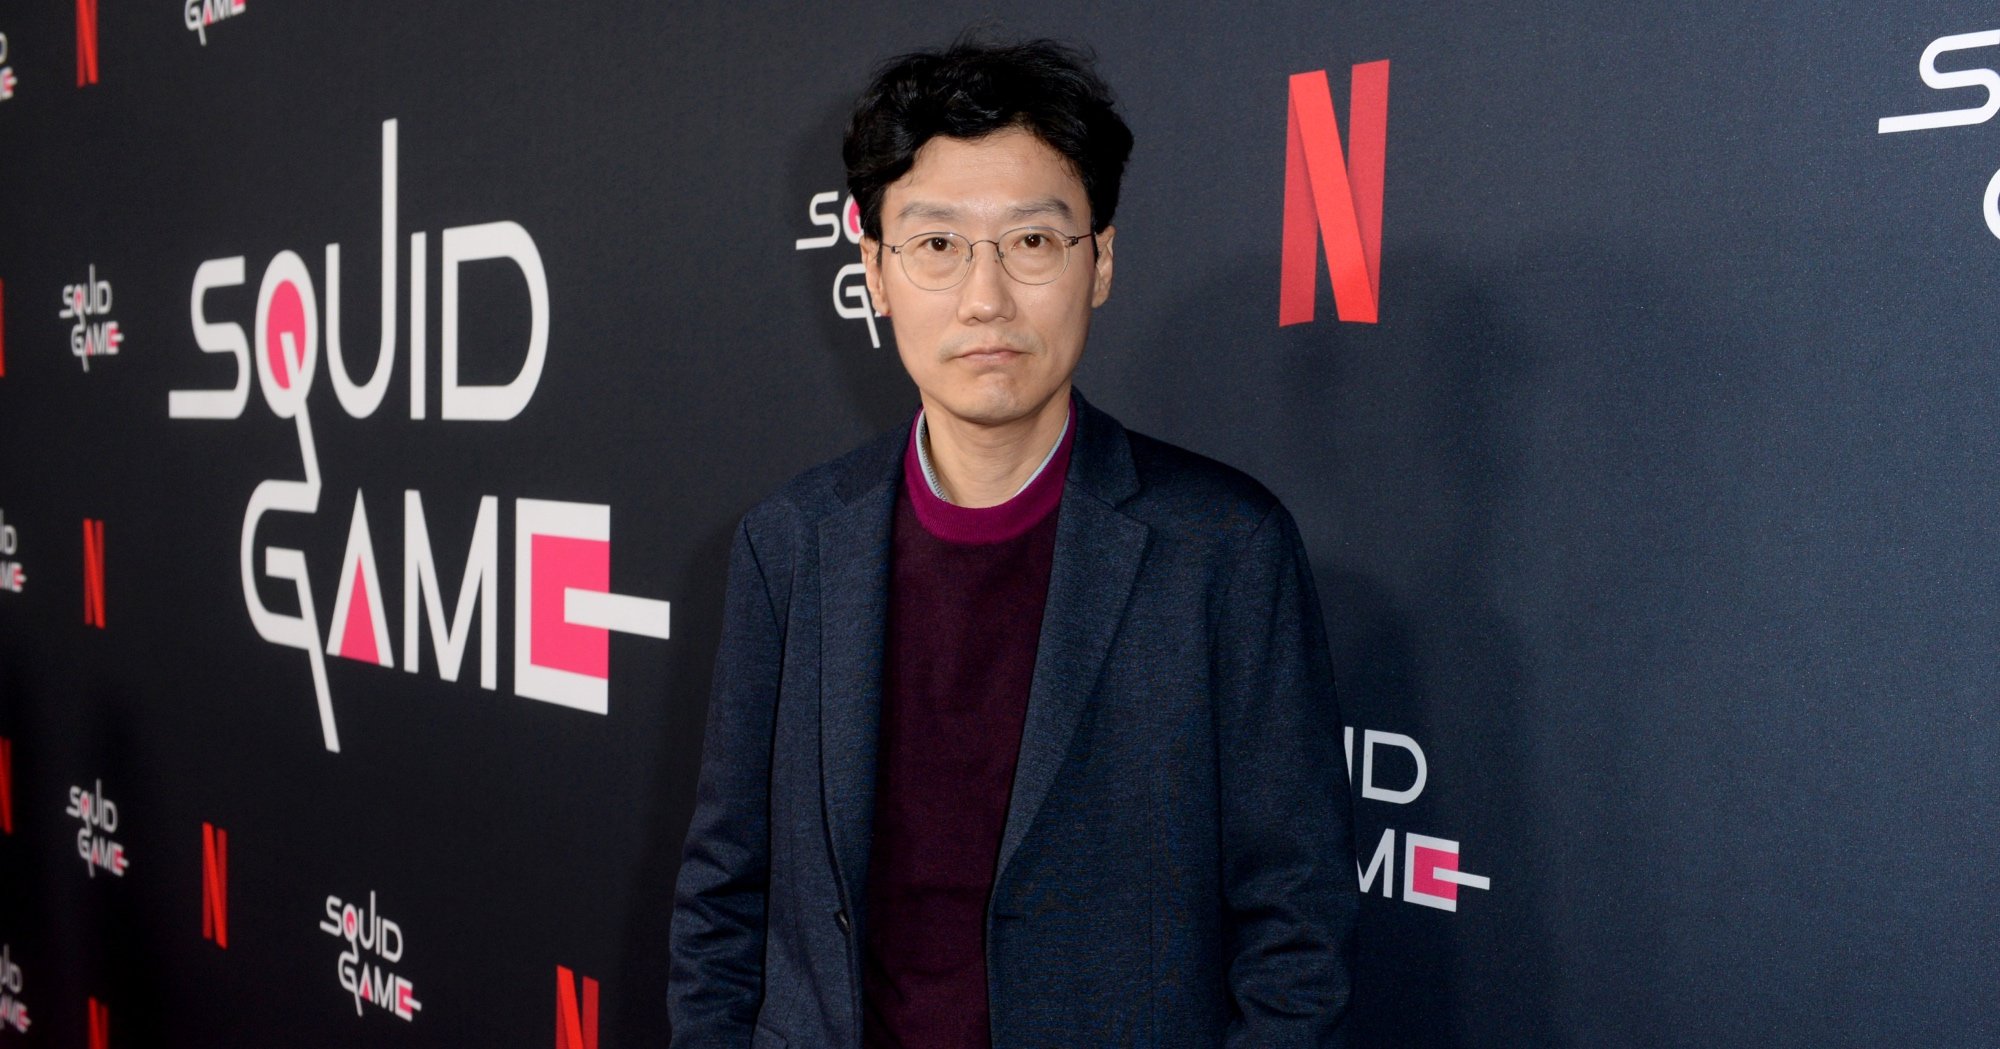 Director Hwang Dong-hyuk of 'Squid Game' K-drama wearing a suit jacket in relation to MrBeast video.